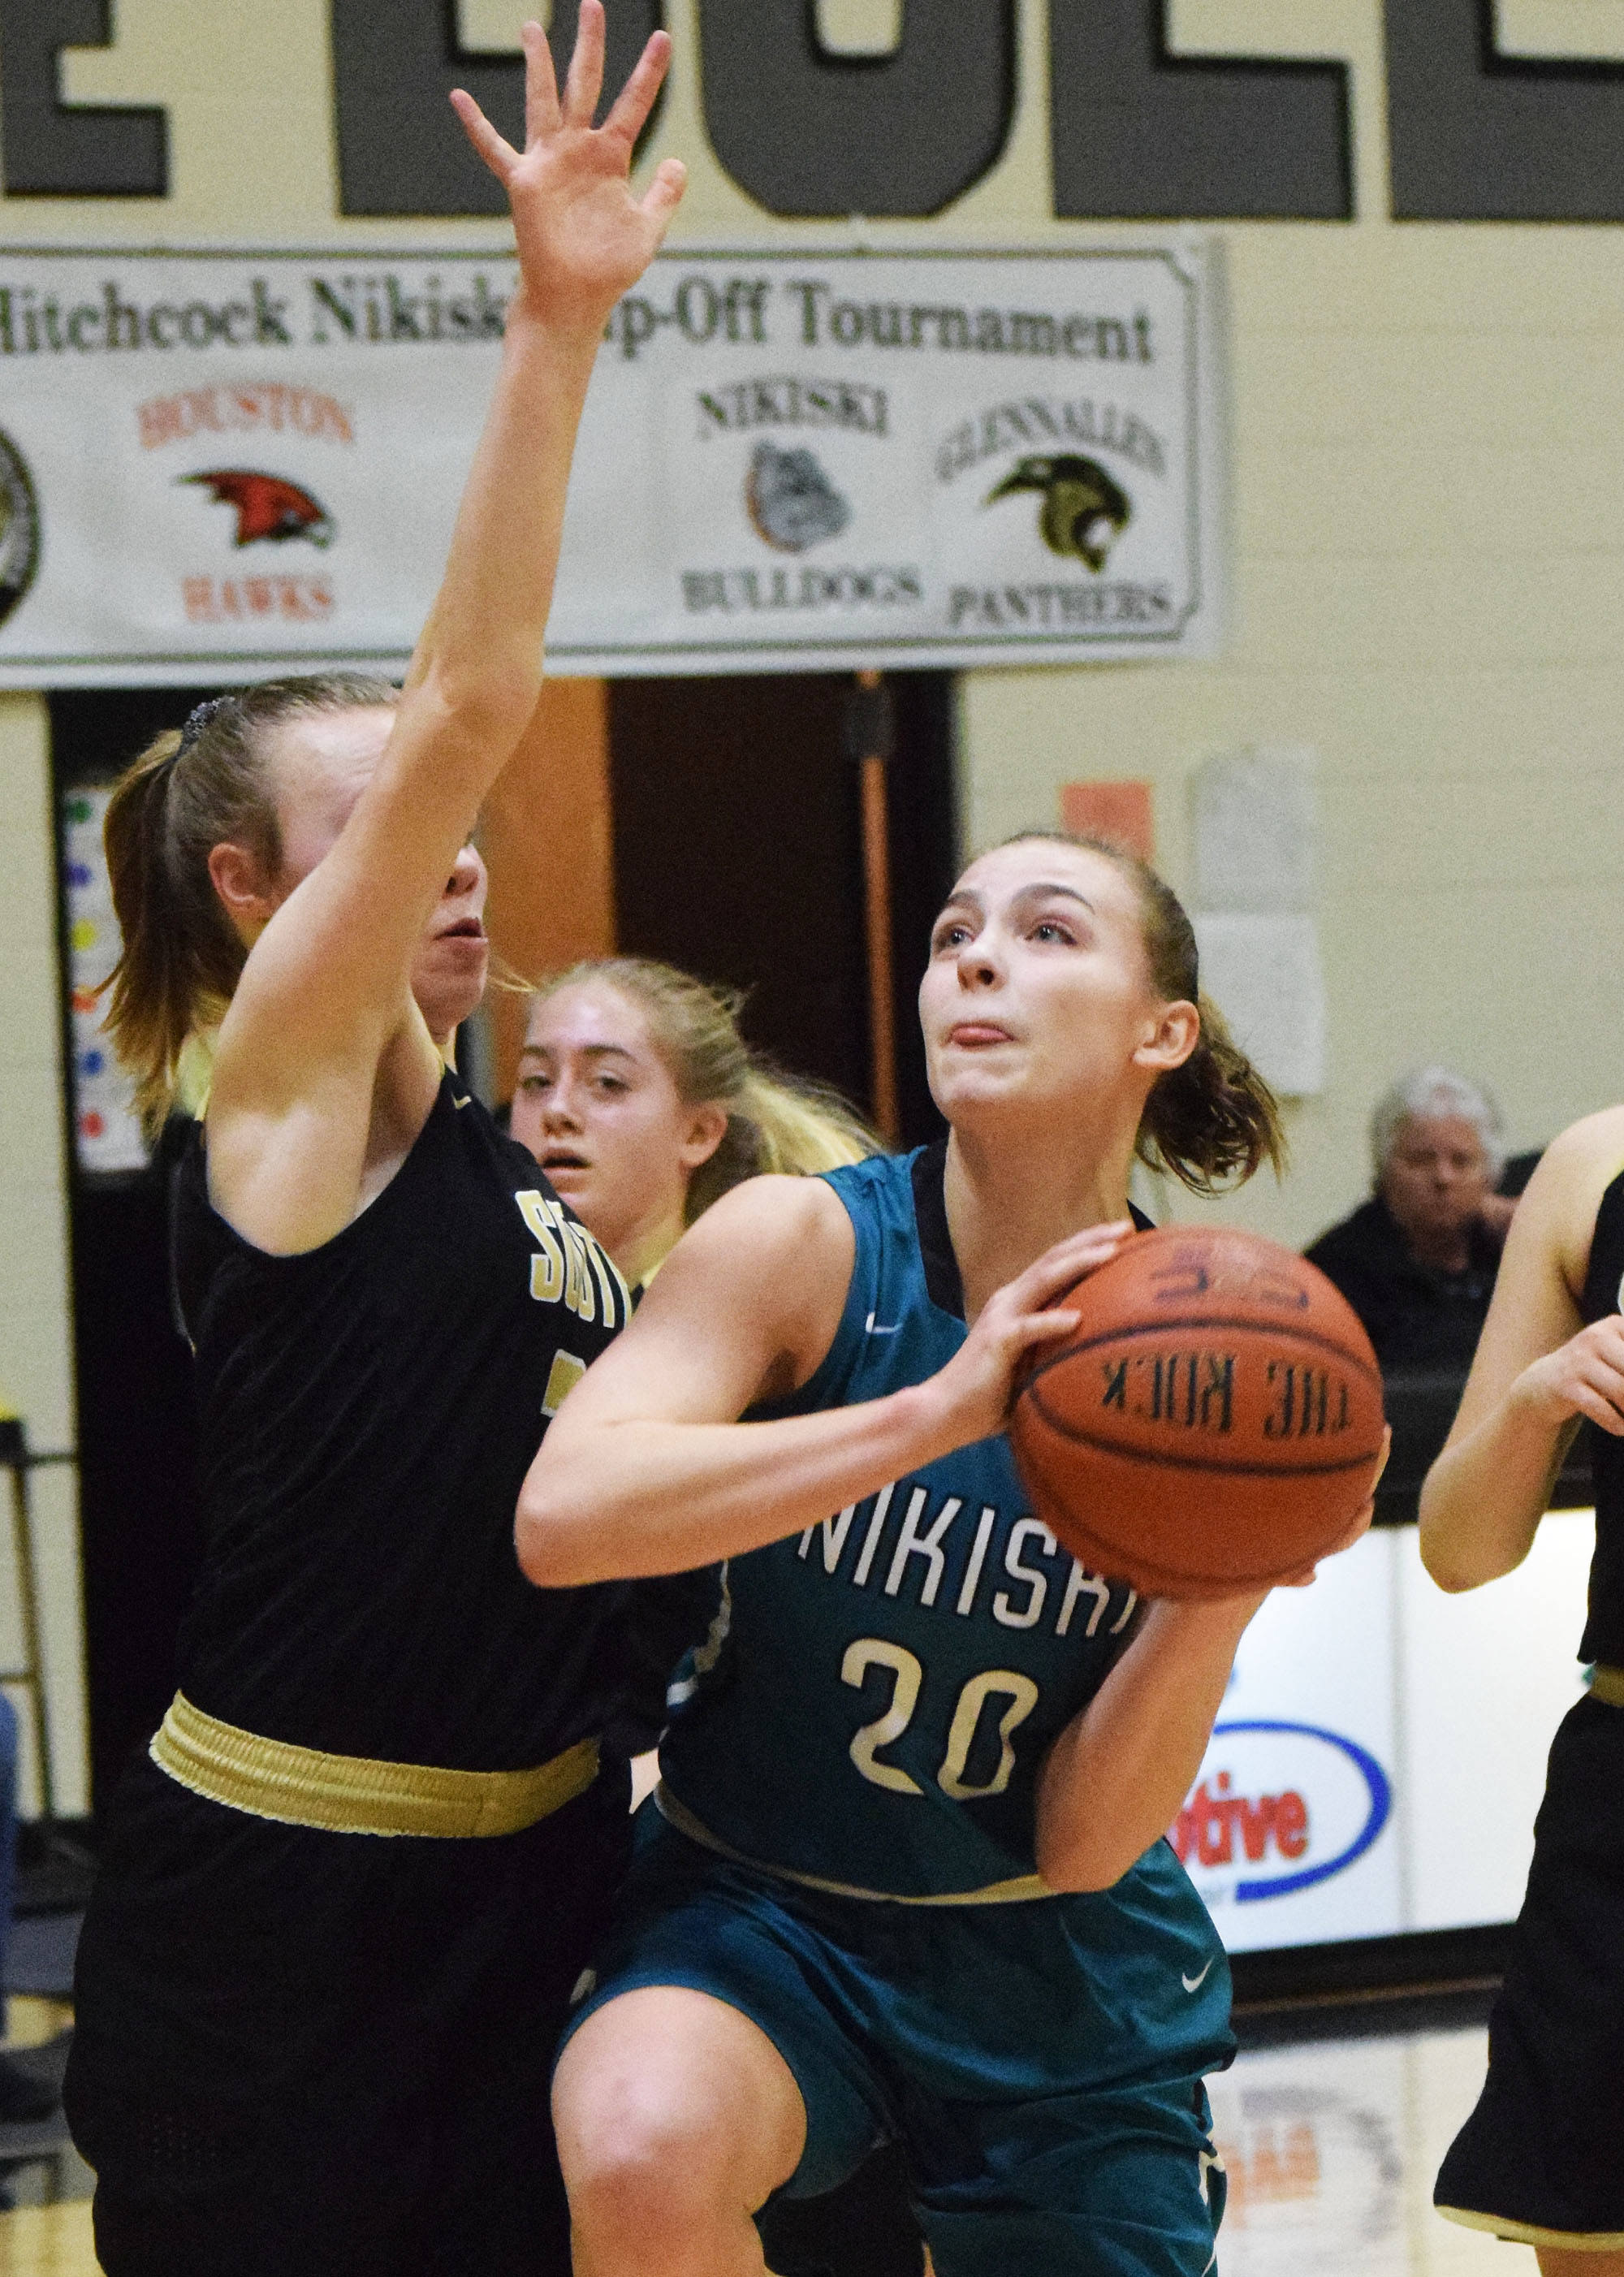 Nikiski’s Bethany Carstens (20) looks for a shot against South’s Maris Soland Saturday at the Rus Hitchcock Nikiski Tip Off tournament. (Photo by Joey Klecka/Peninsula Clario¡n)